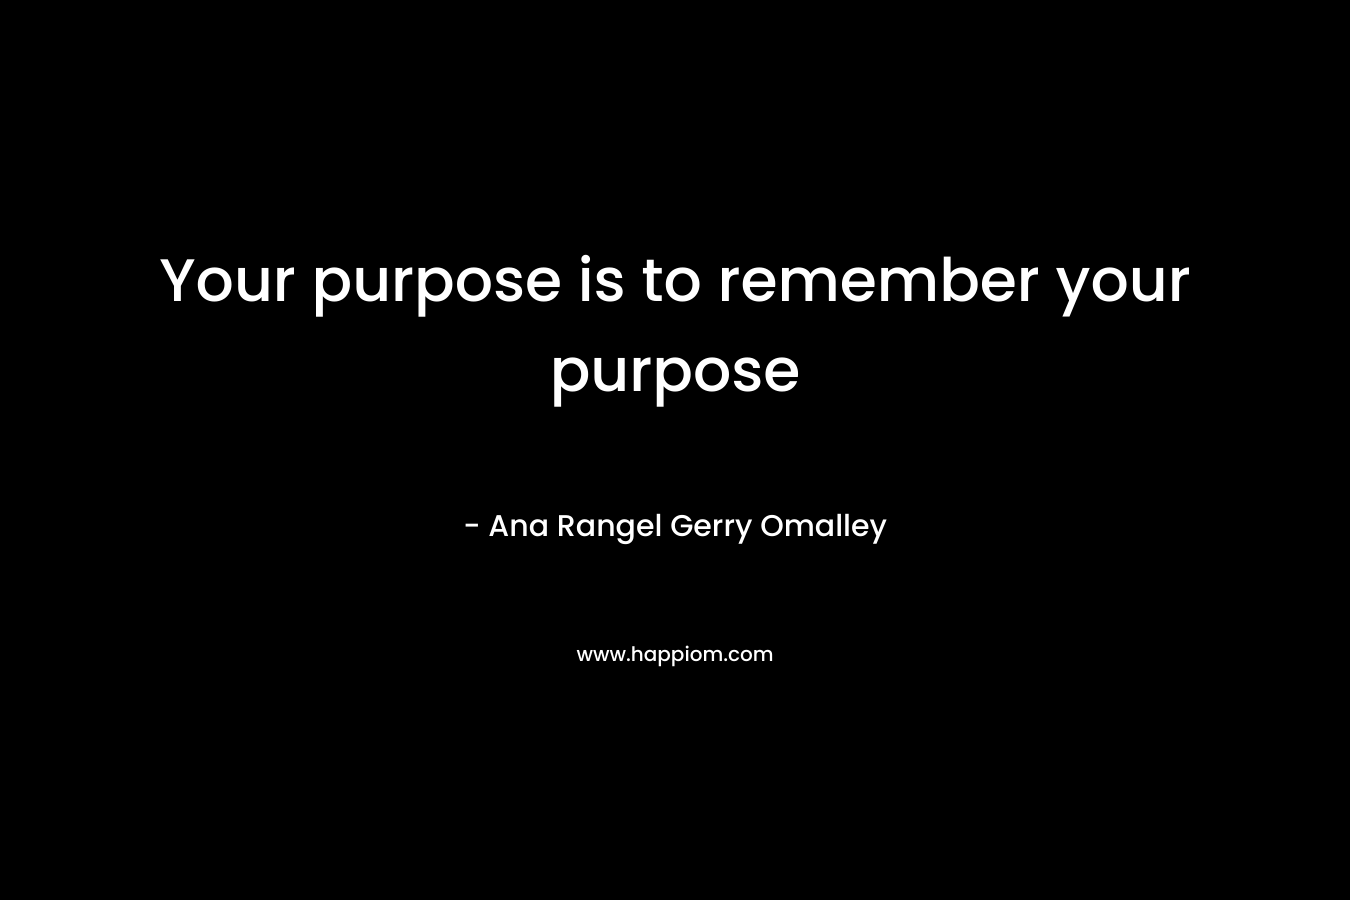 Your purpose is to remember your purpose